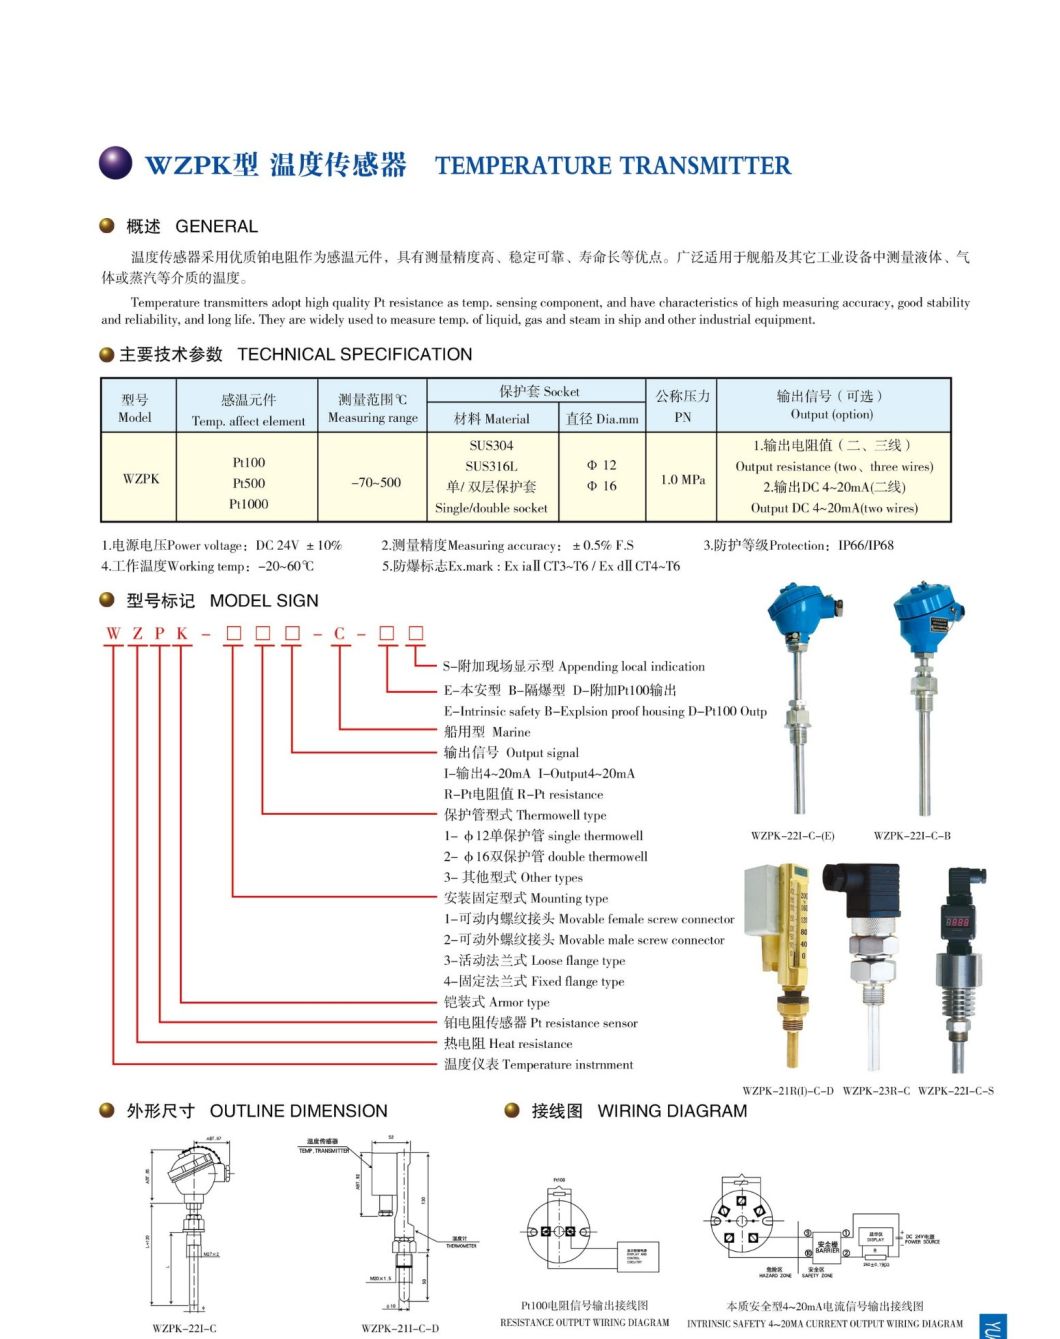 Hot Selling Thermal Resistance Temperature Transmitter for Liquid/Gas/Solid